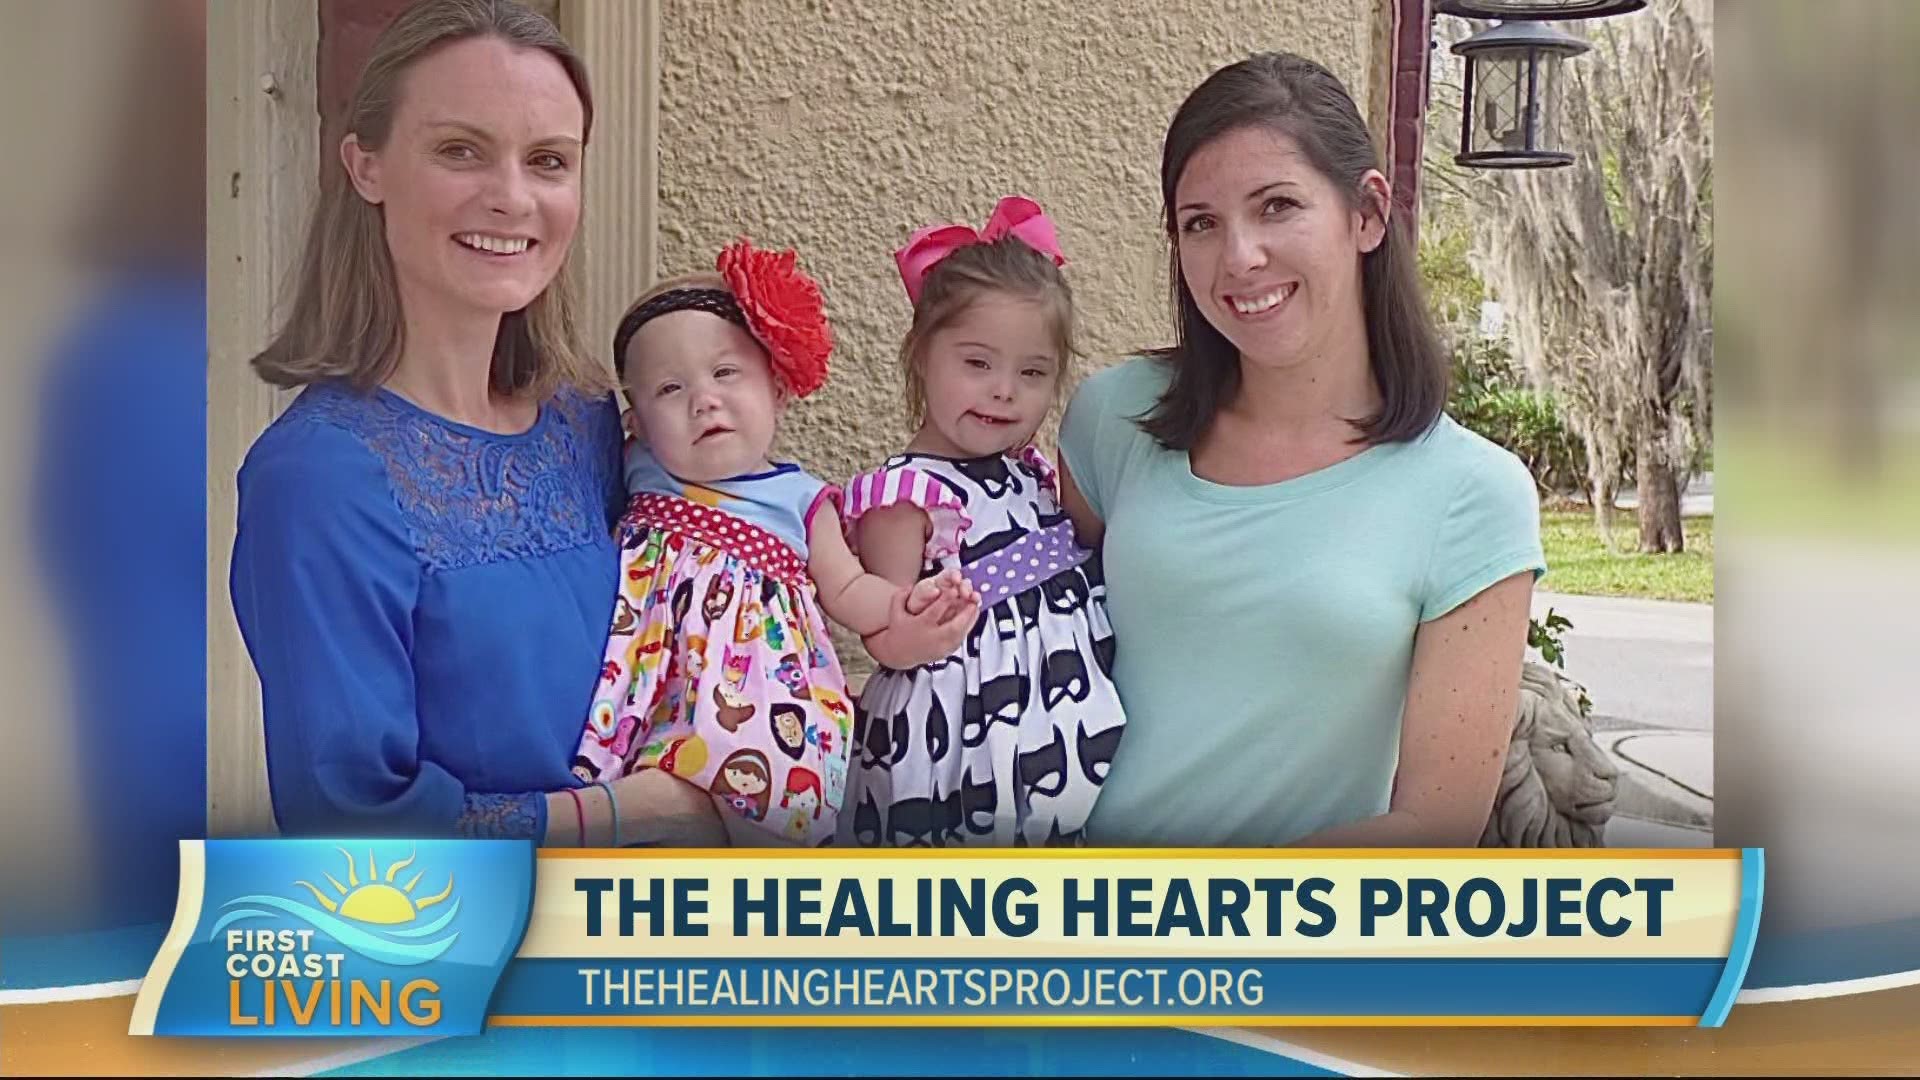 This local non-profit organization provides support to families and patients as they face the life-long challenges of congenital heart disease.